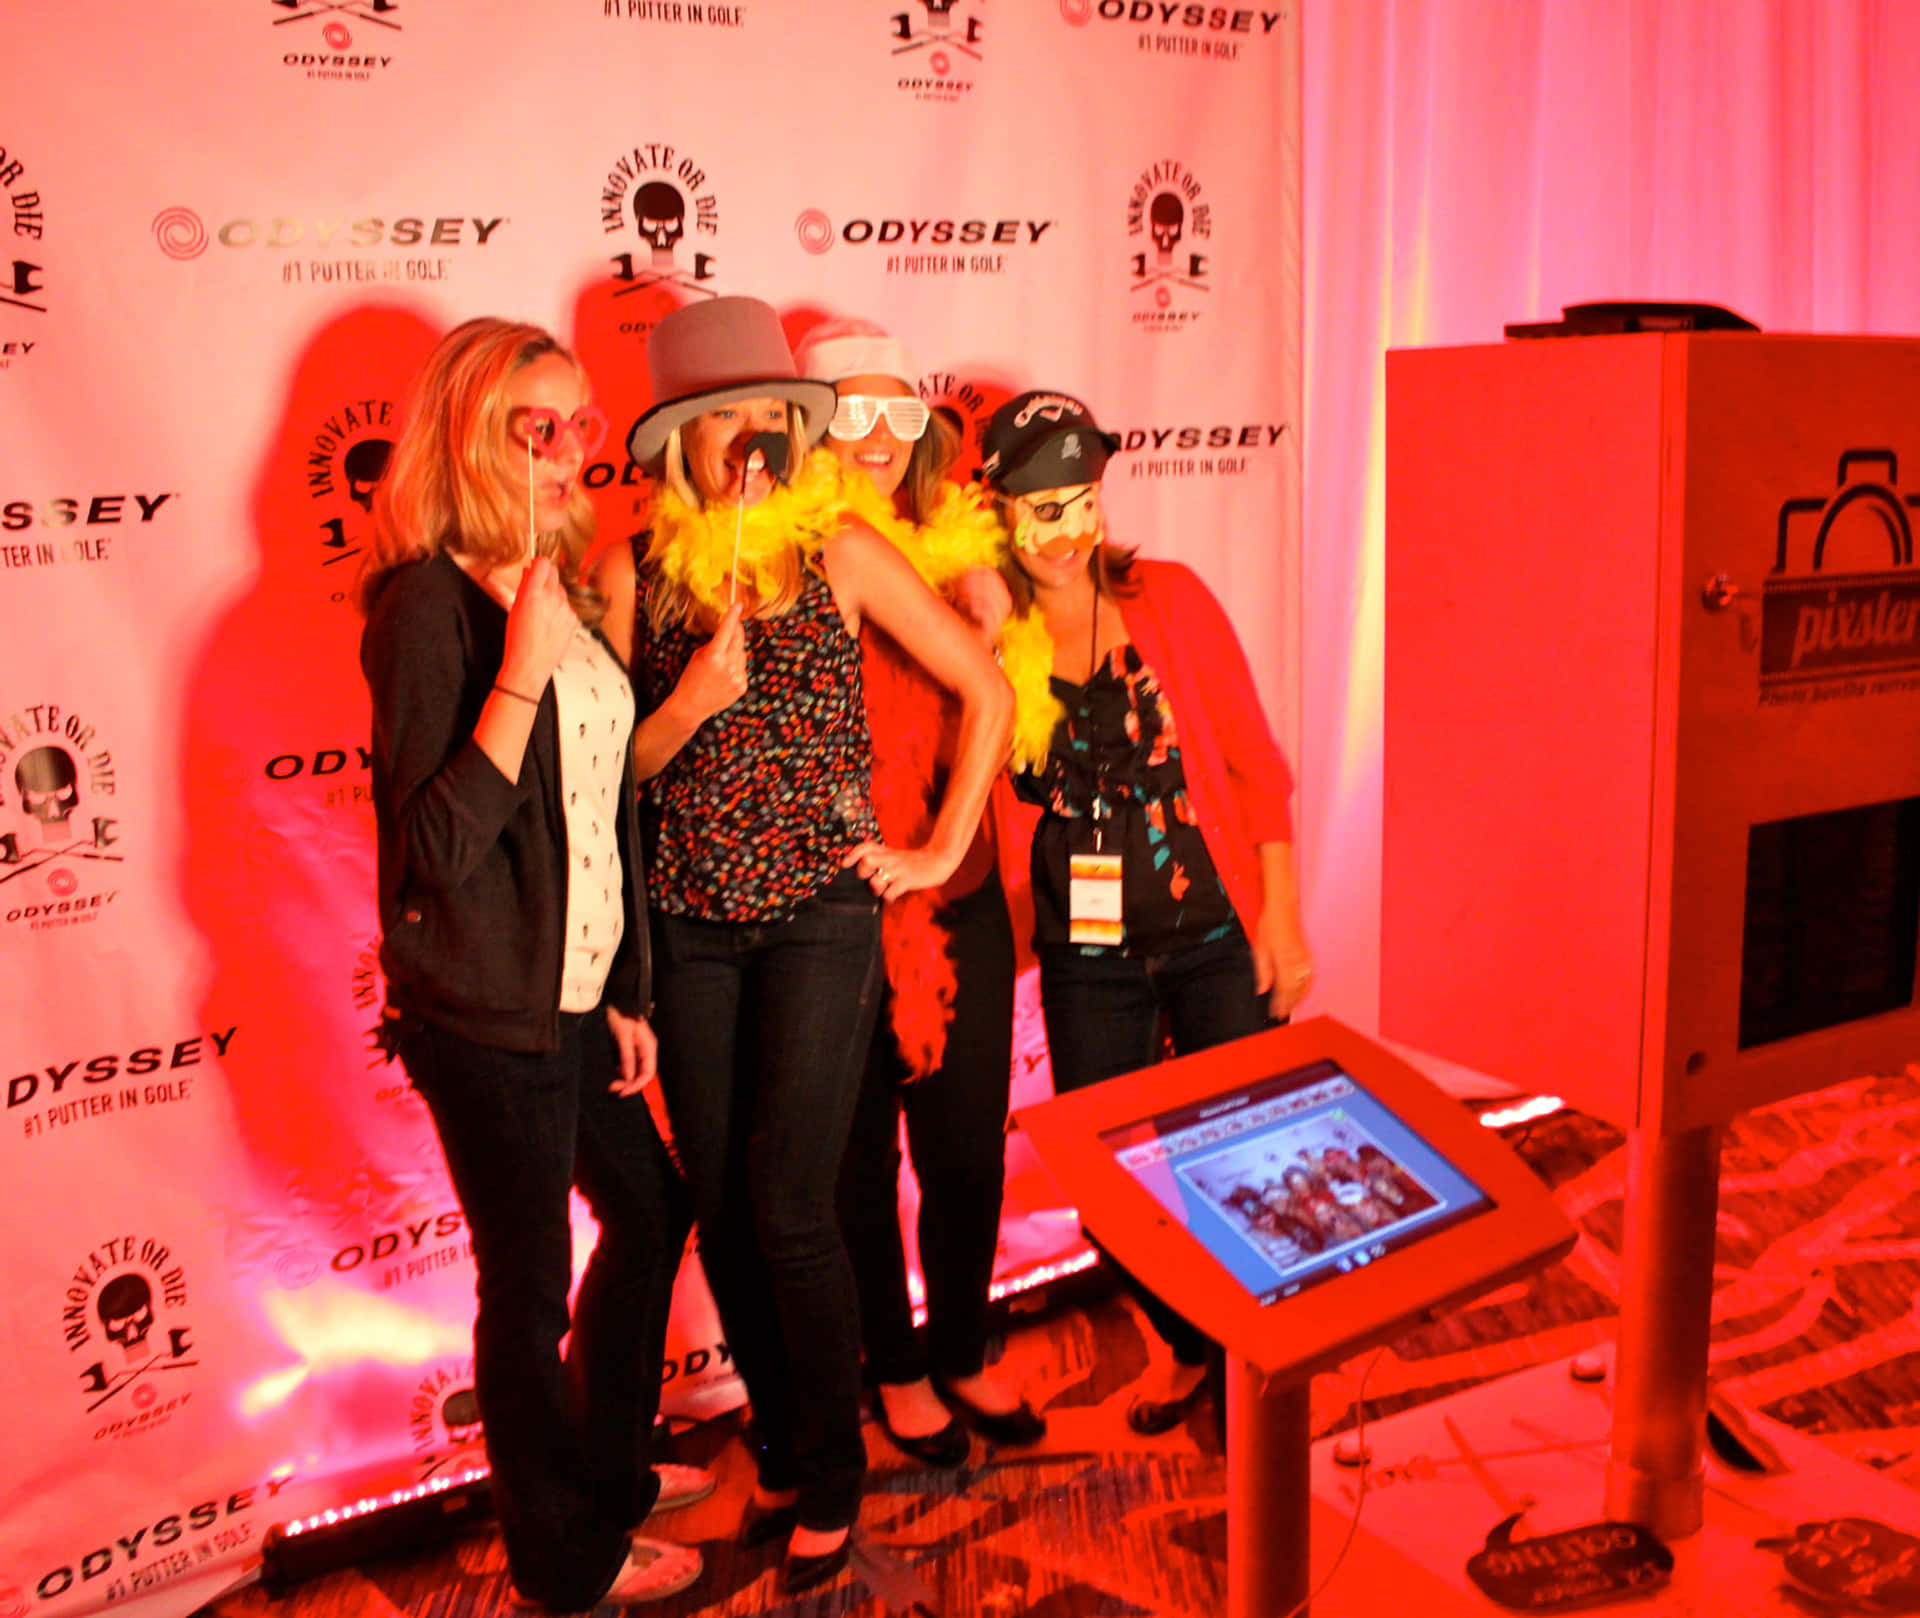 Fun Memories at the Photo Booth